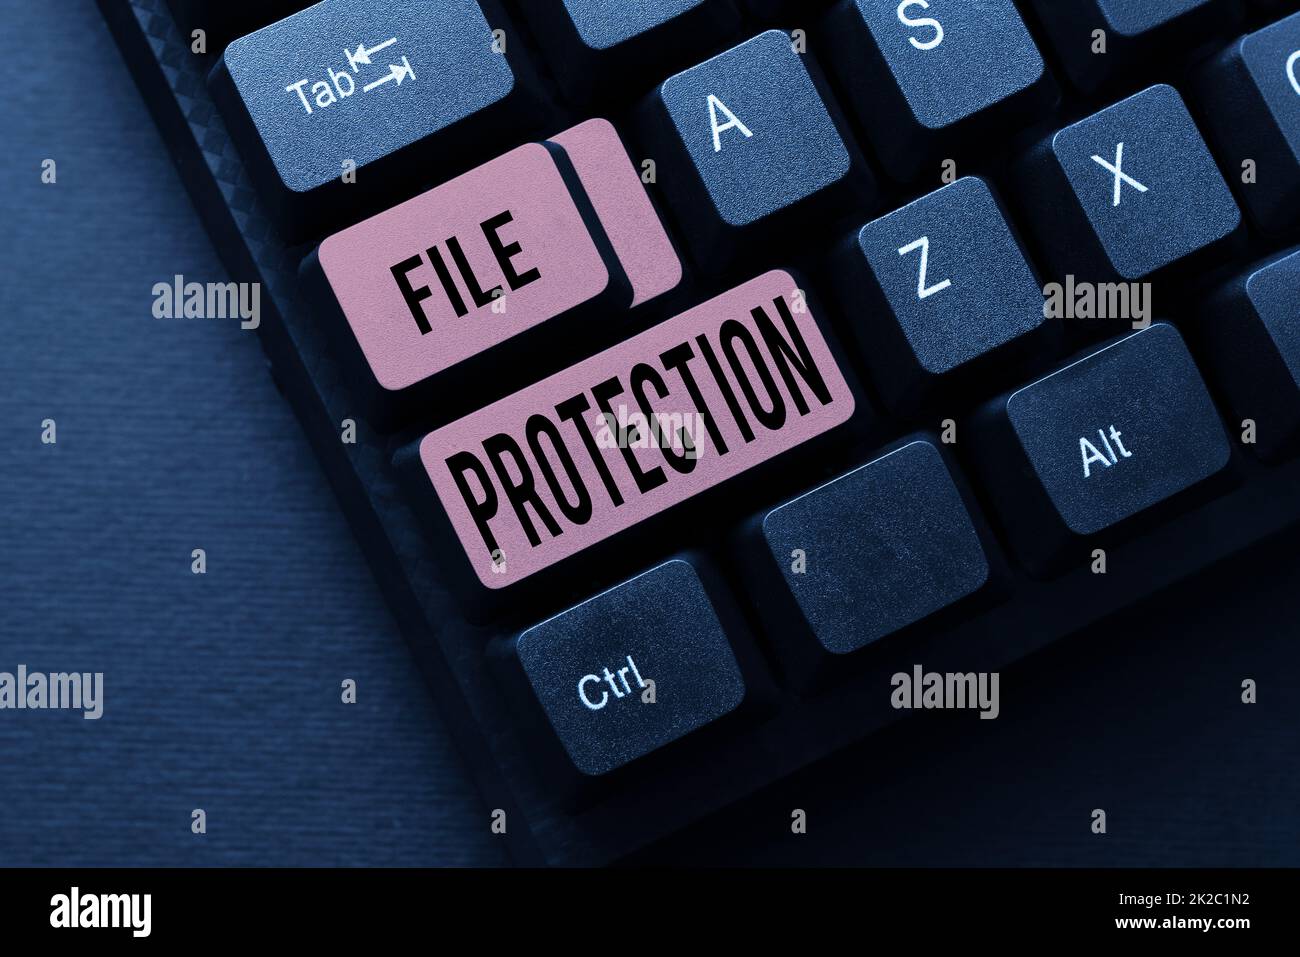 Writing displaying text File Protection. Word Written on Preventing accidental erasing of data using storage medium Composing New Screen Title Ideas, Typing Play Script Concepts Stock Photo